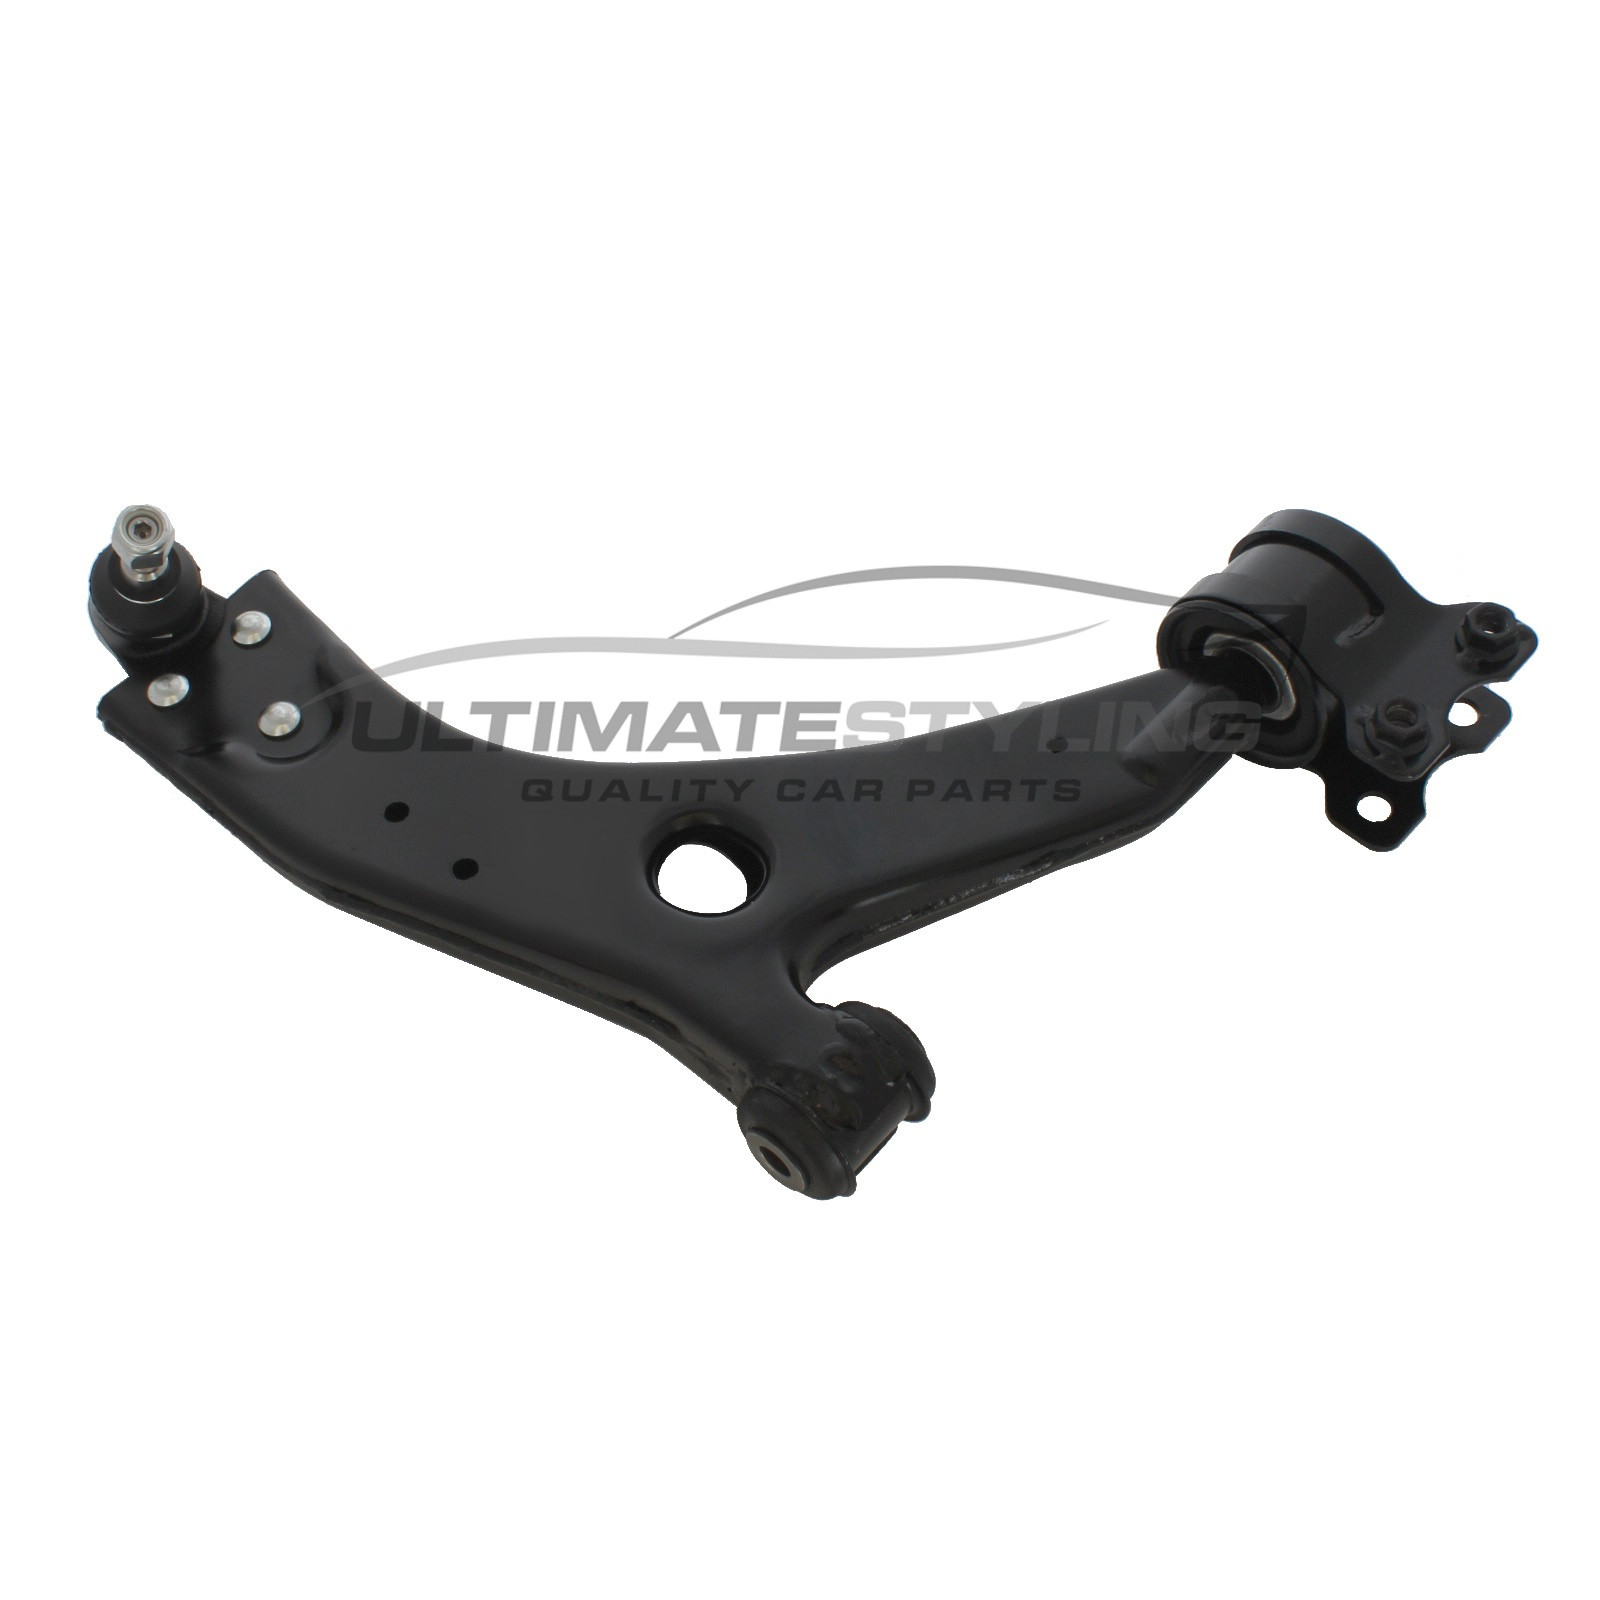 Ford C-MAX 2007-2009, Ford Focus 2003-2012, Volvo C30 2006-2012, Volvo C70 2006-2014, Volvo S40 2004-2012, Volvo V50 2004-2012 Front Lower Suspension Arm (Steel) Including 21mm Ball Joint and Rear Bush Driver Side (RH)